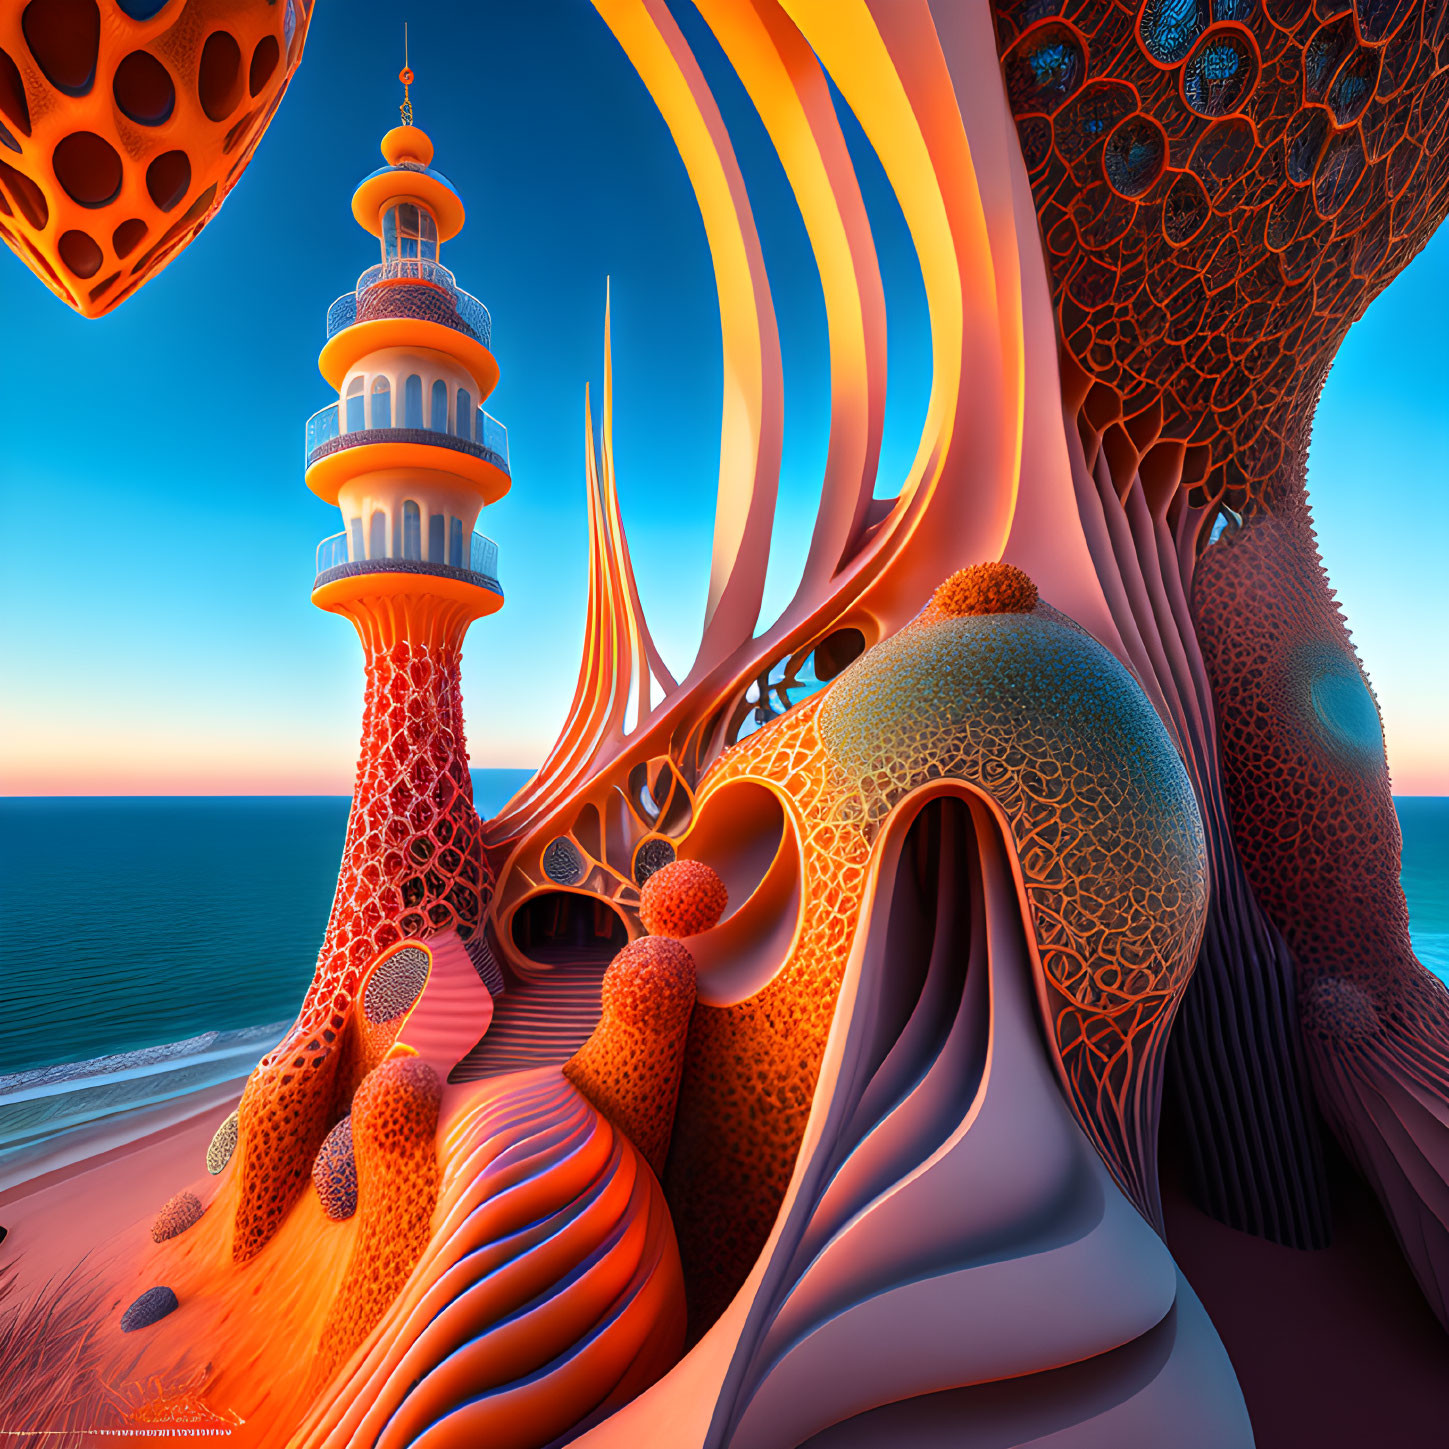 Vibrant surreal landscape with alien structures and sunset sky